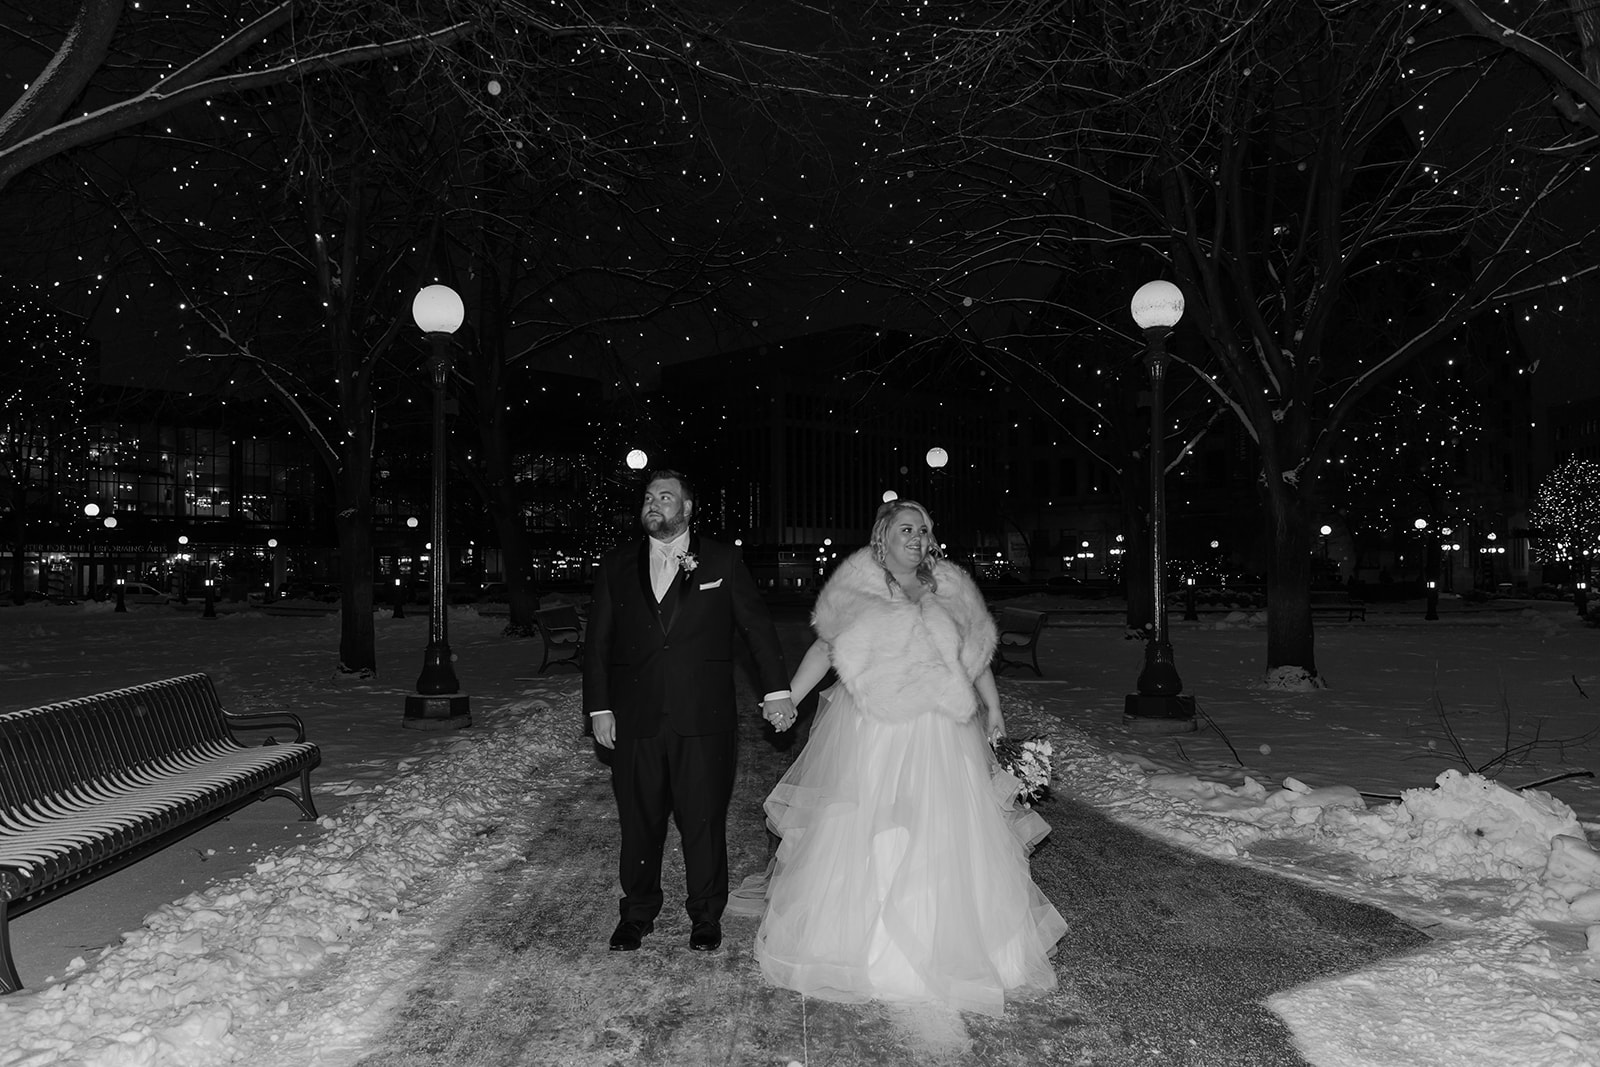 Bride and groom walking in a snowstorm